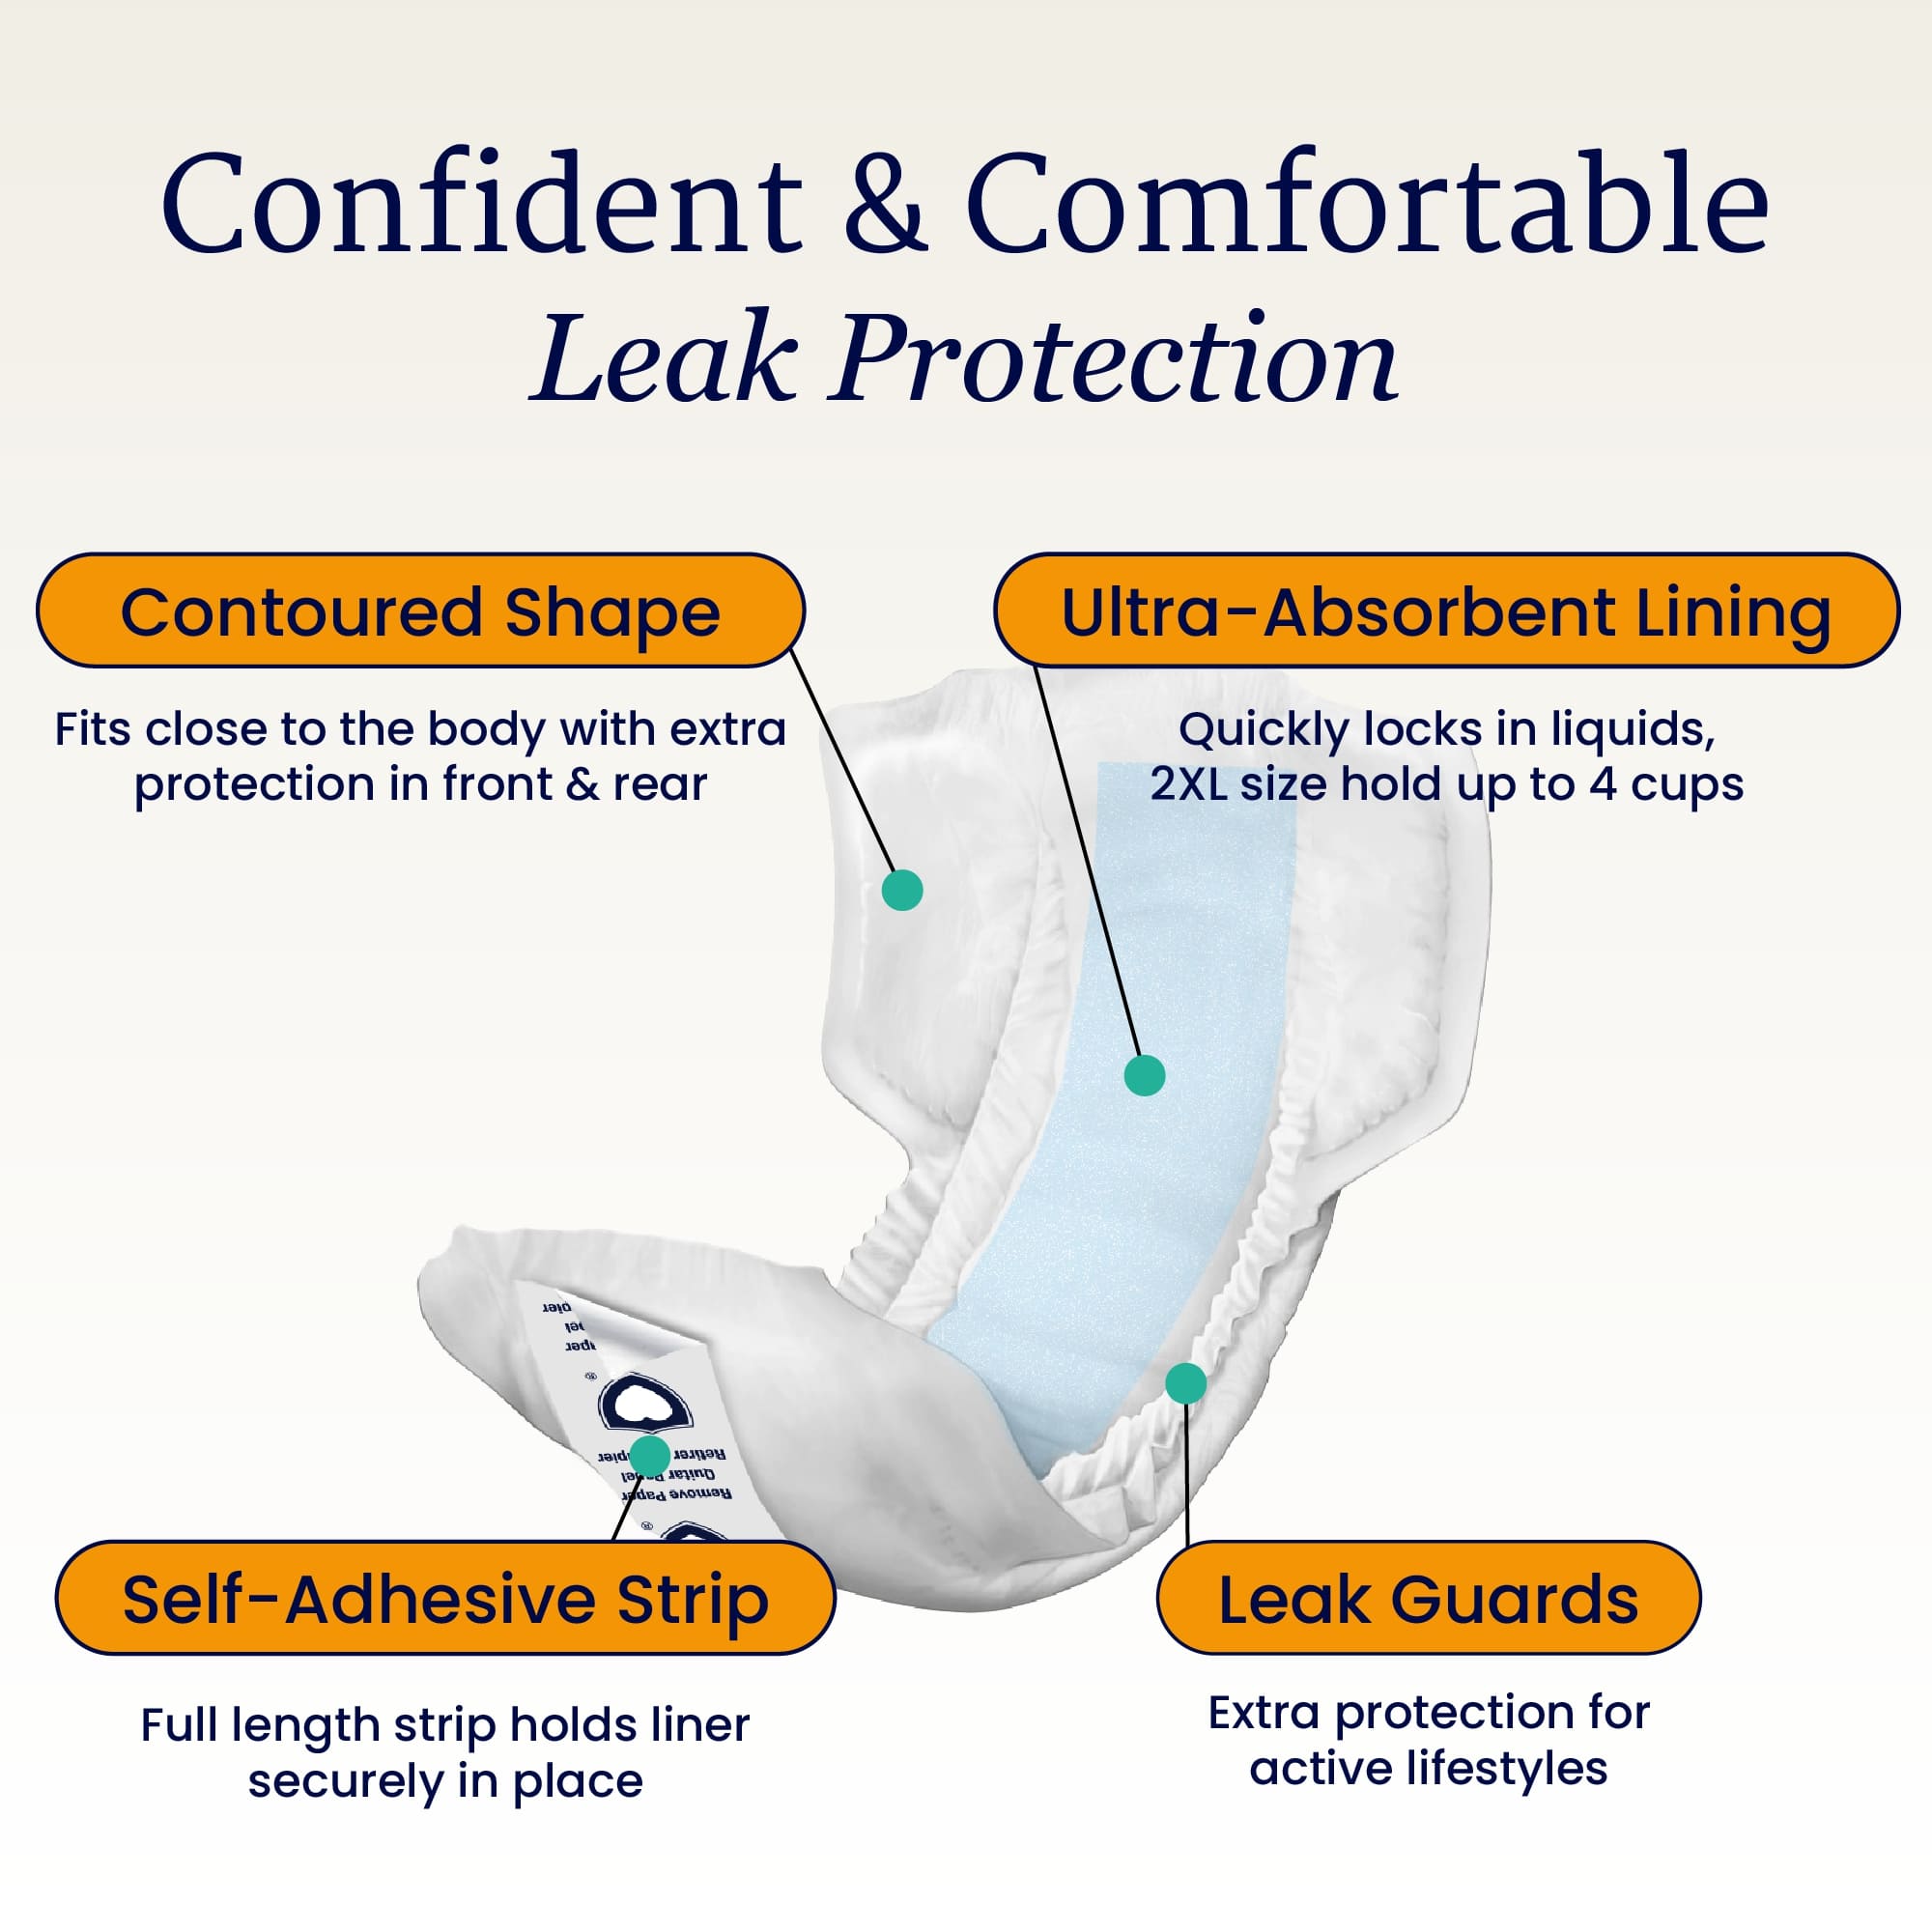 Features of NorthShore DynaDry incontinence liners - heavy duty, leak guards, self-adhesive strip, soft, 